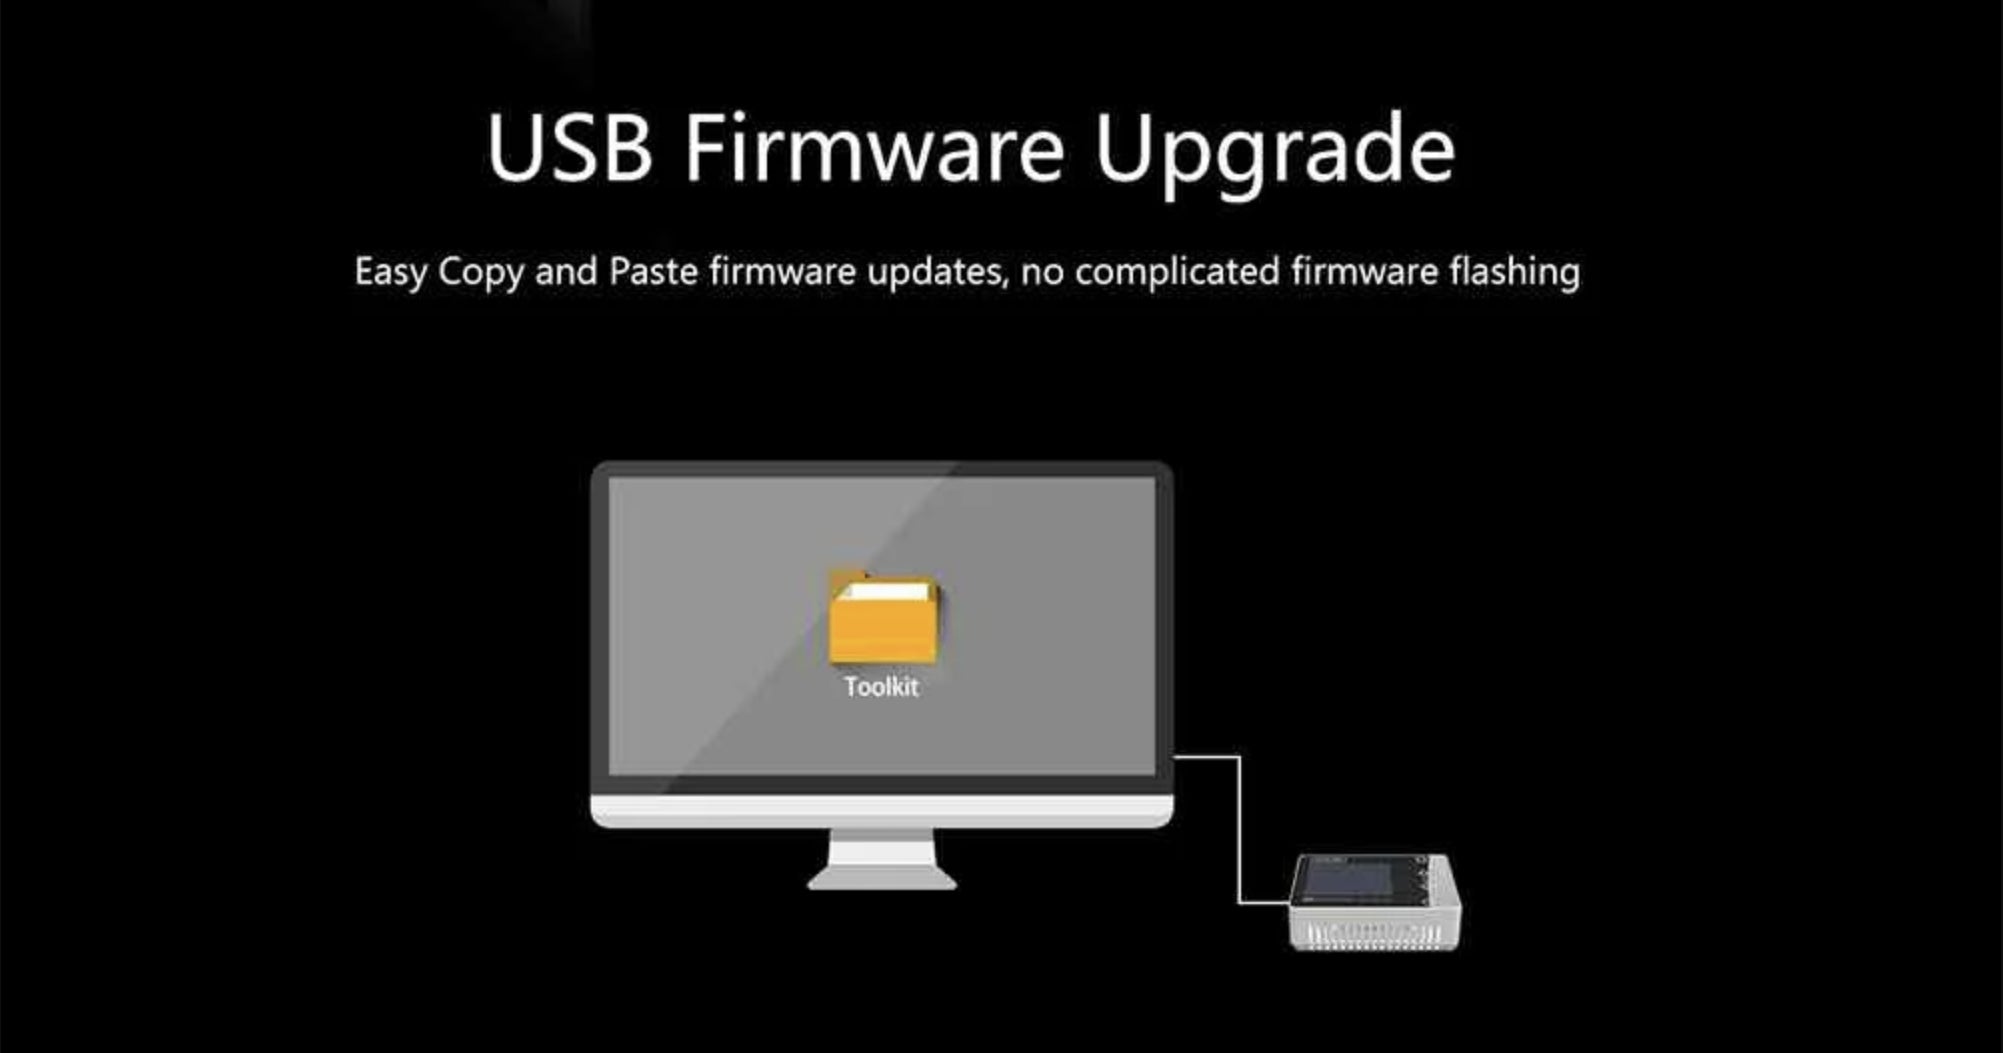 ToolkitRC M6 Charger, USB Firmware Upgrade and Paste firmware updates; no complicated flashing Toolkit Easy Copy